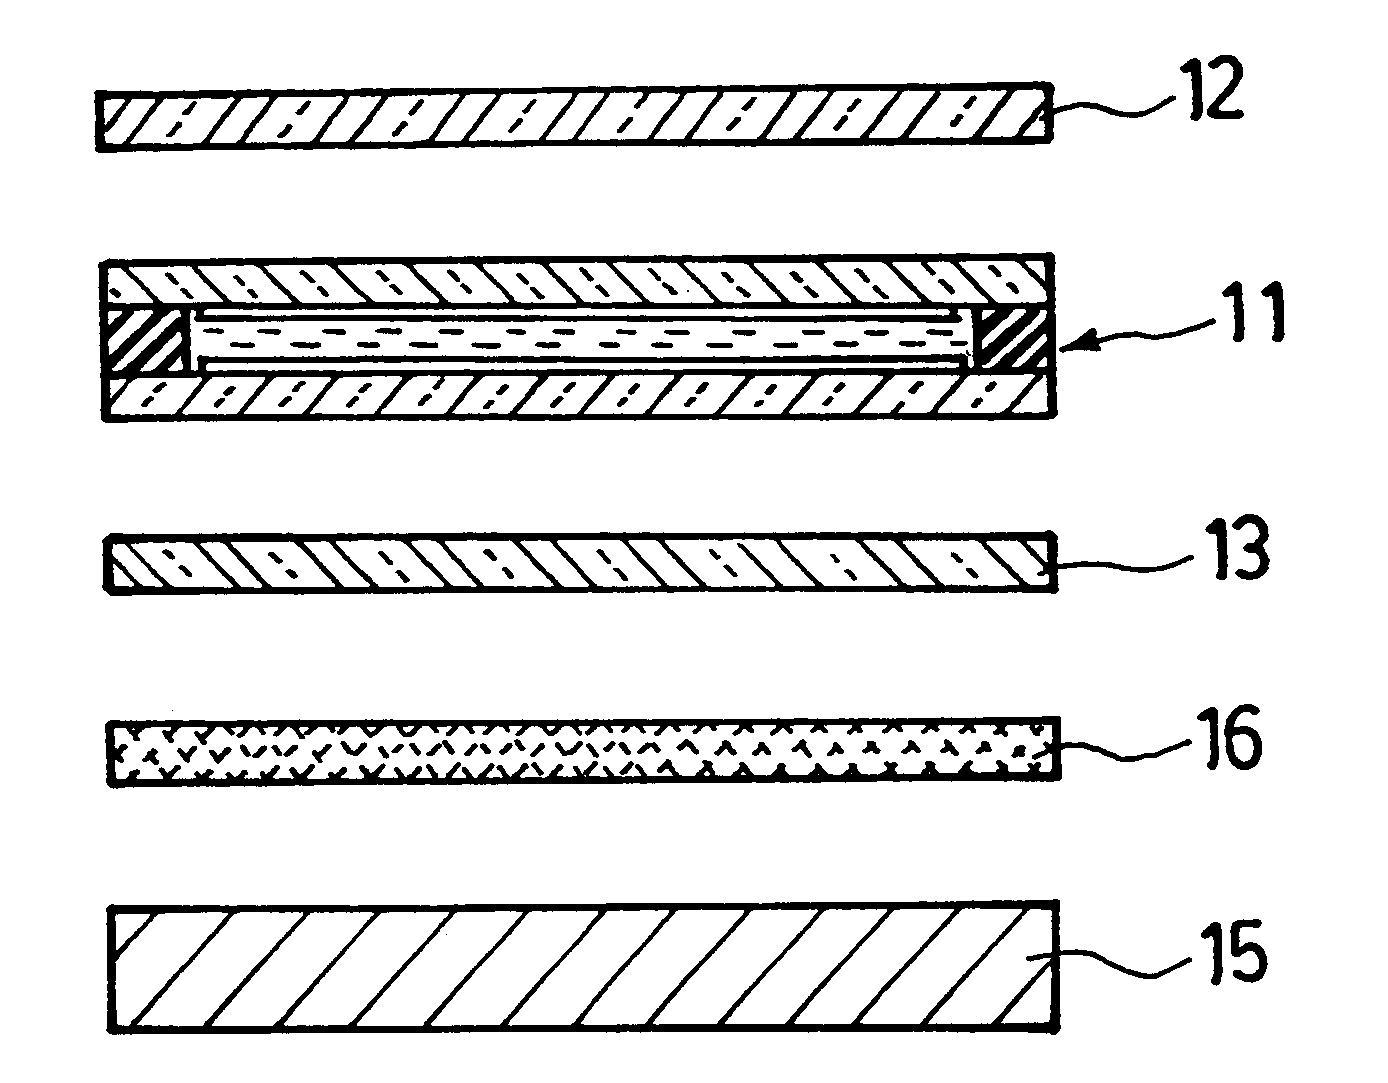 Liquid crystal display device with two reflective polarizers providing metallic appearance effects